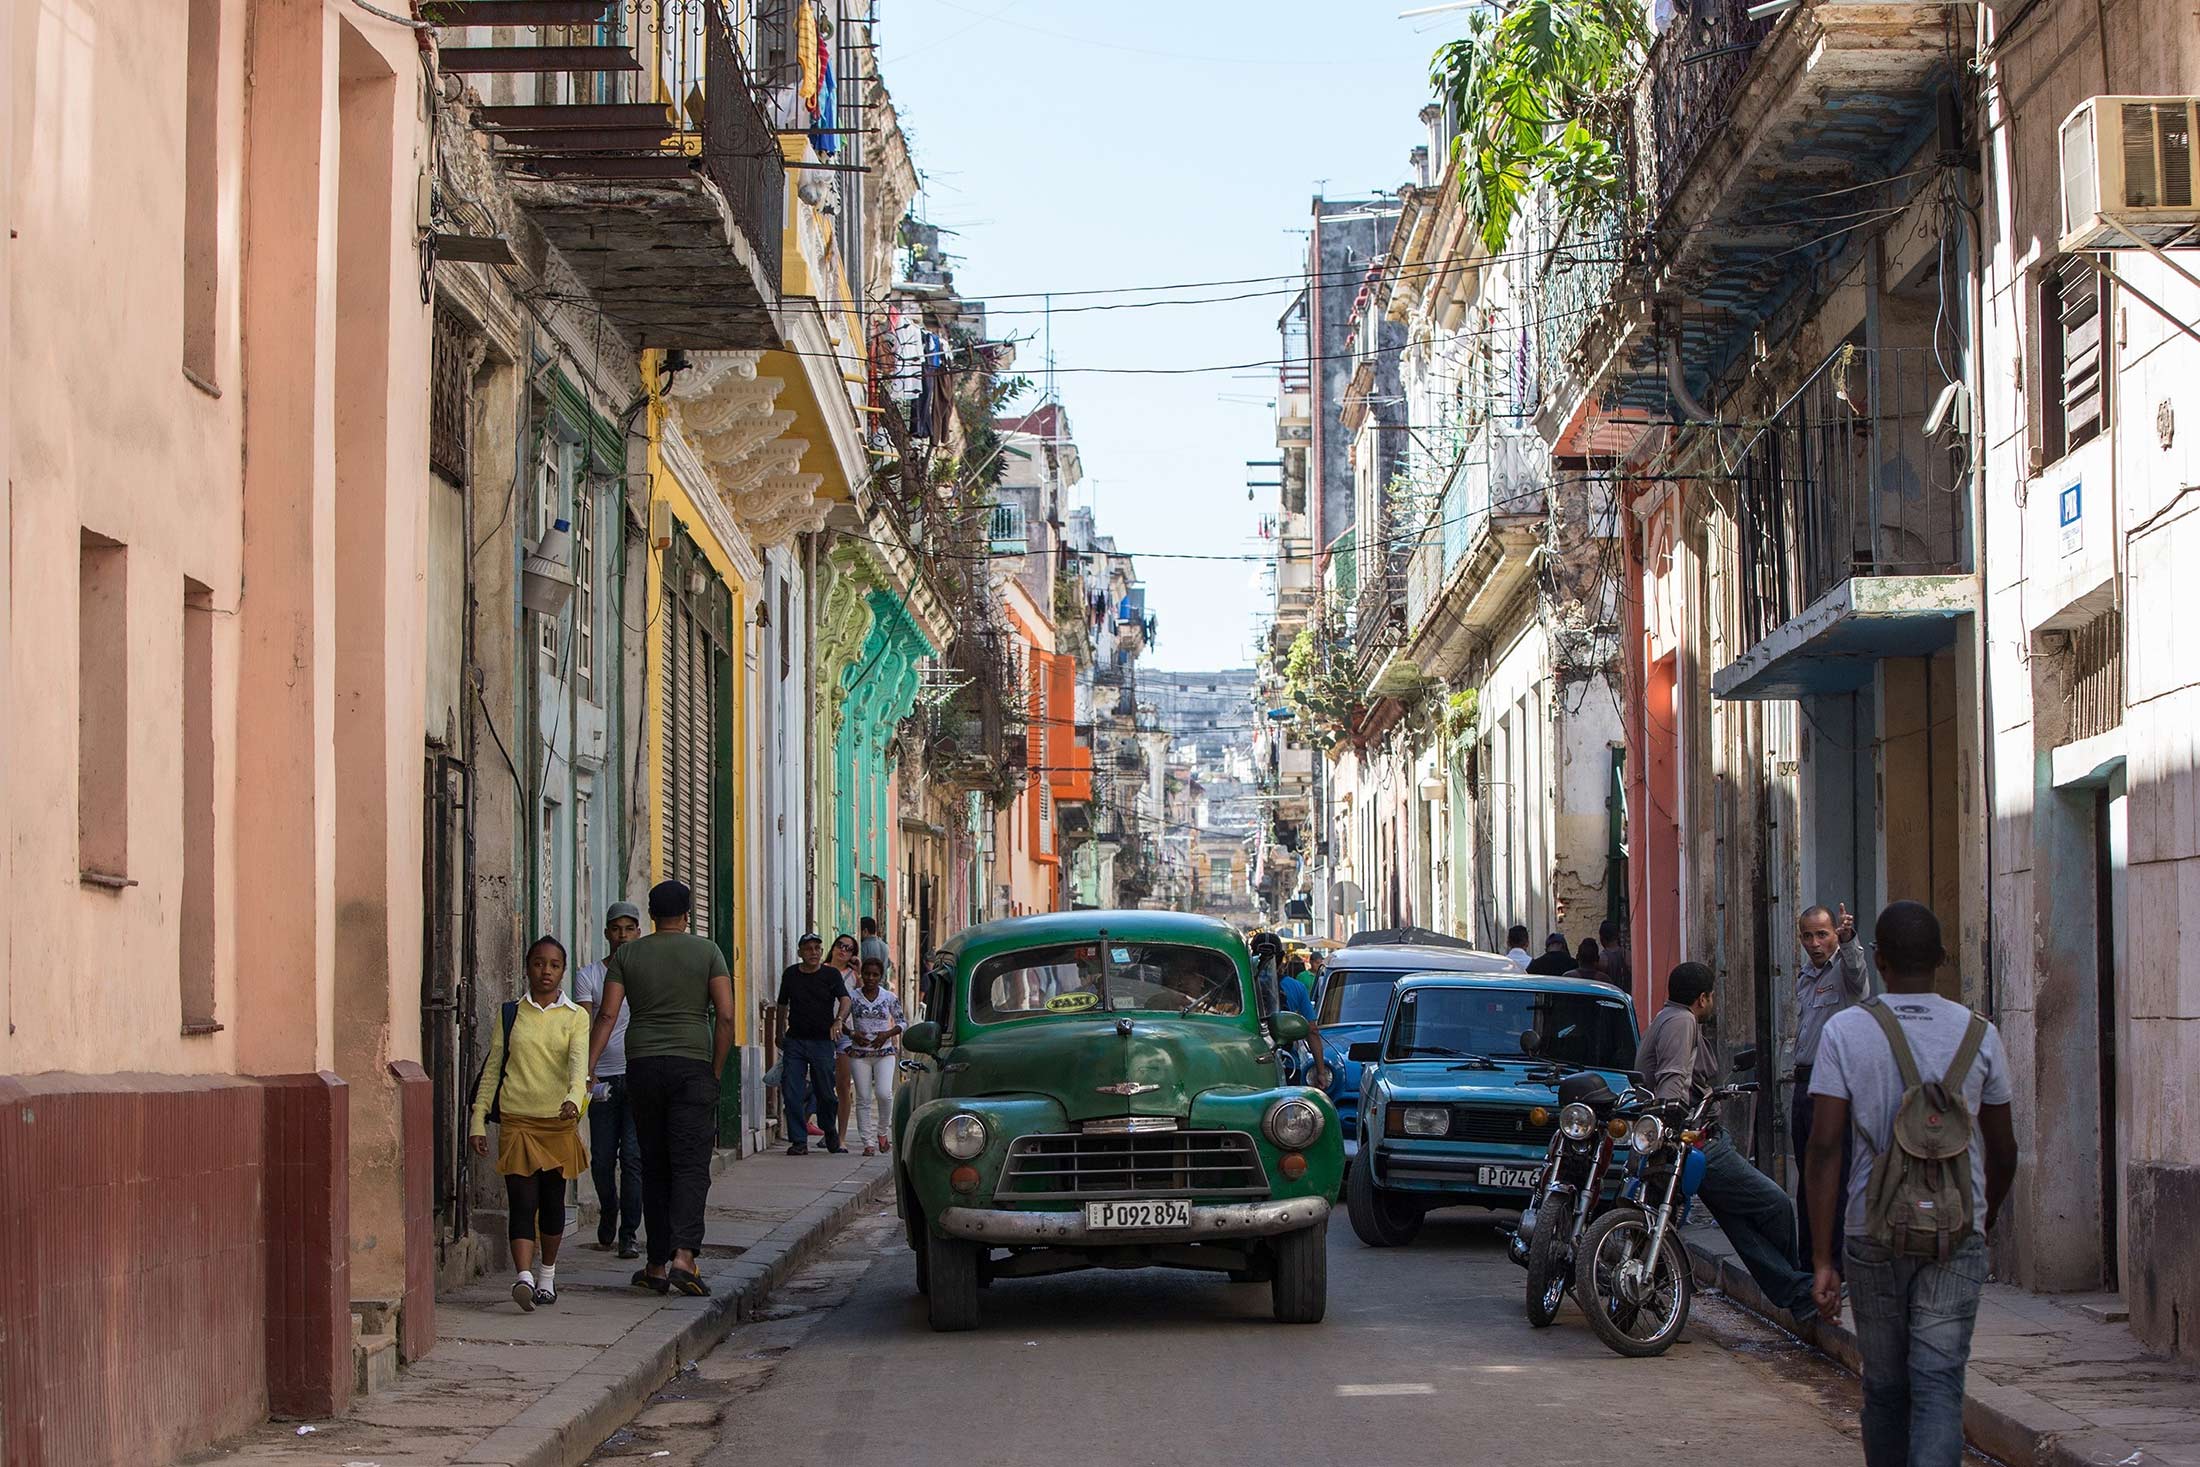 Bloomberg Opinion on X: Cuba's health care system is even more